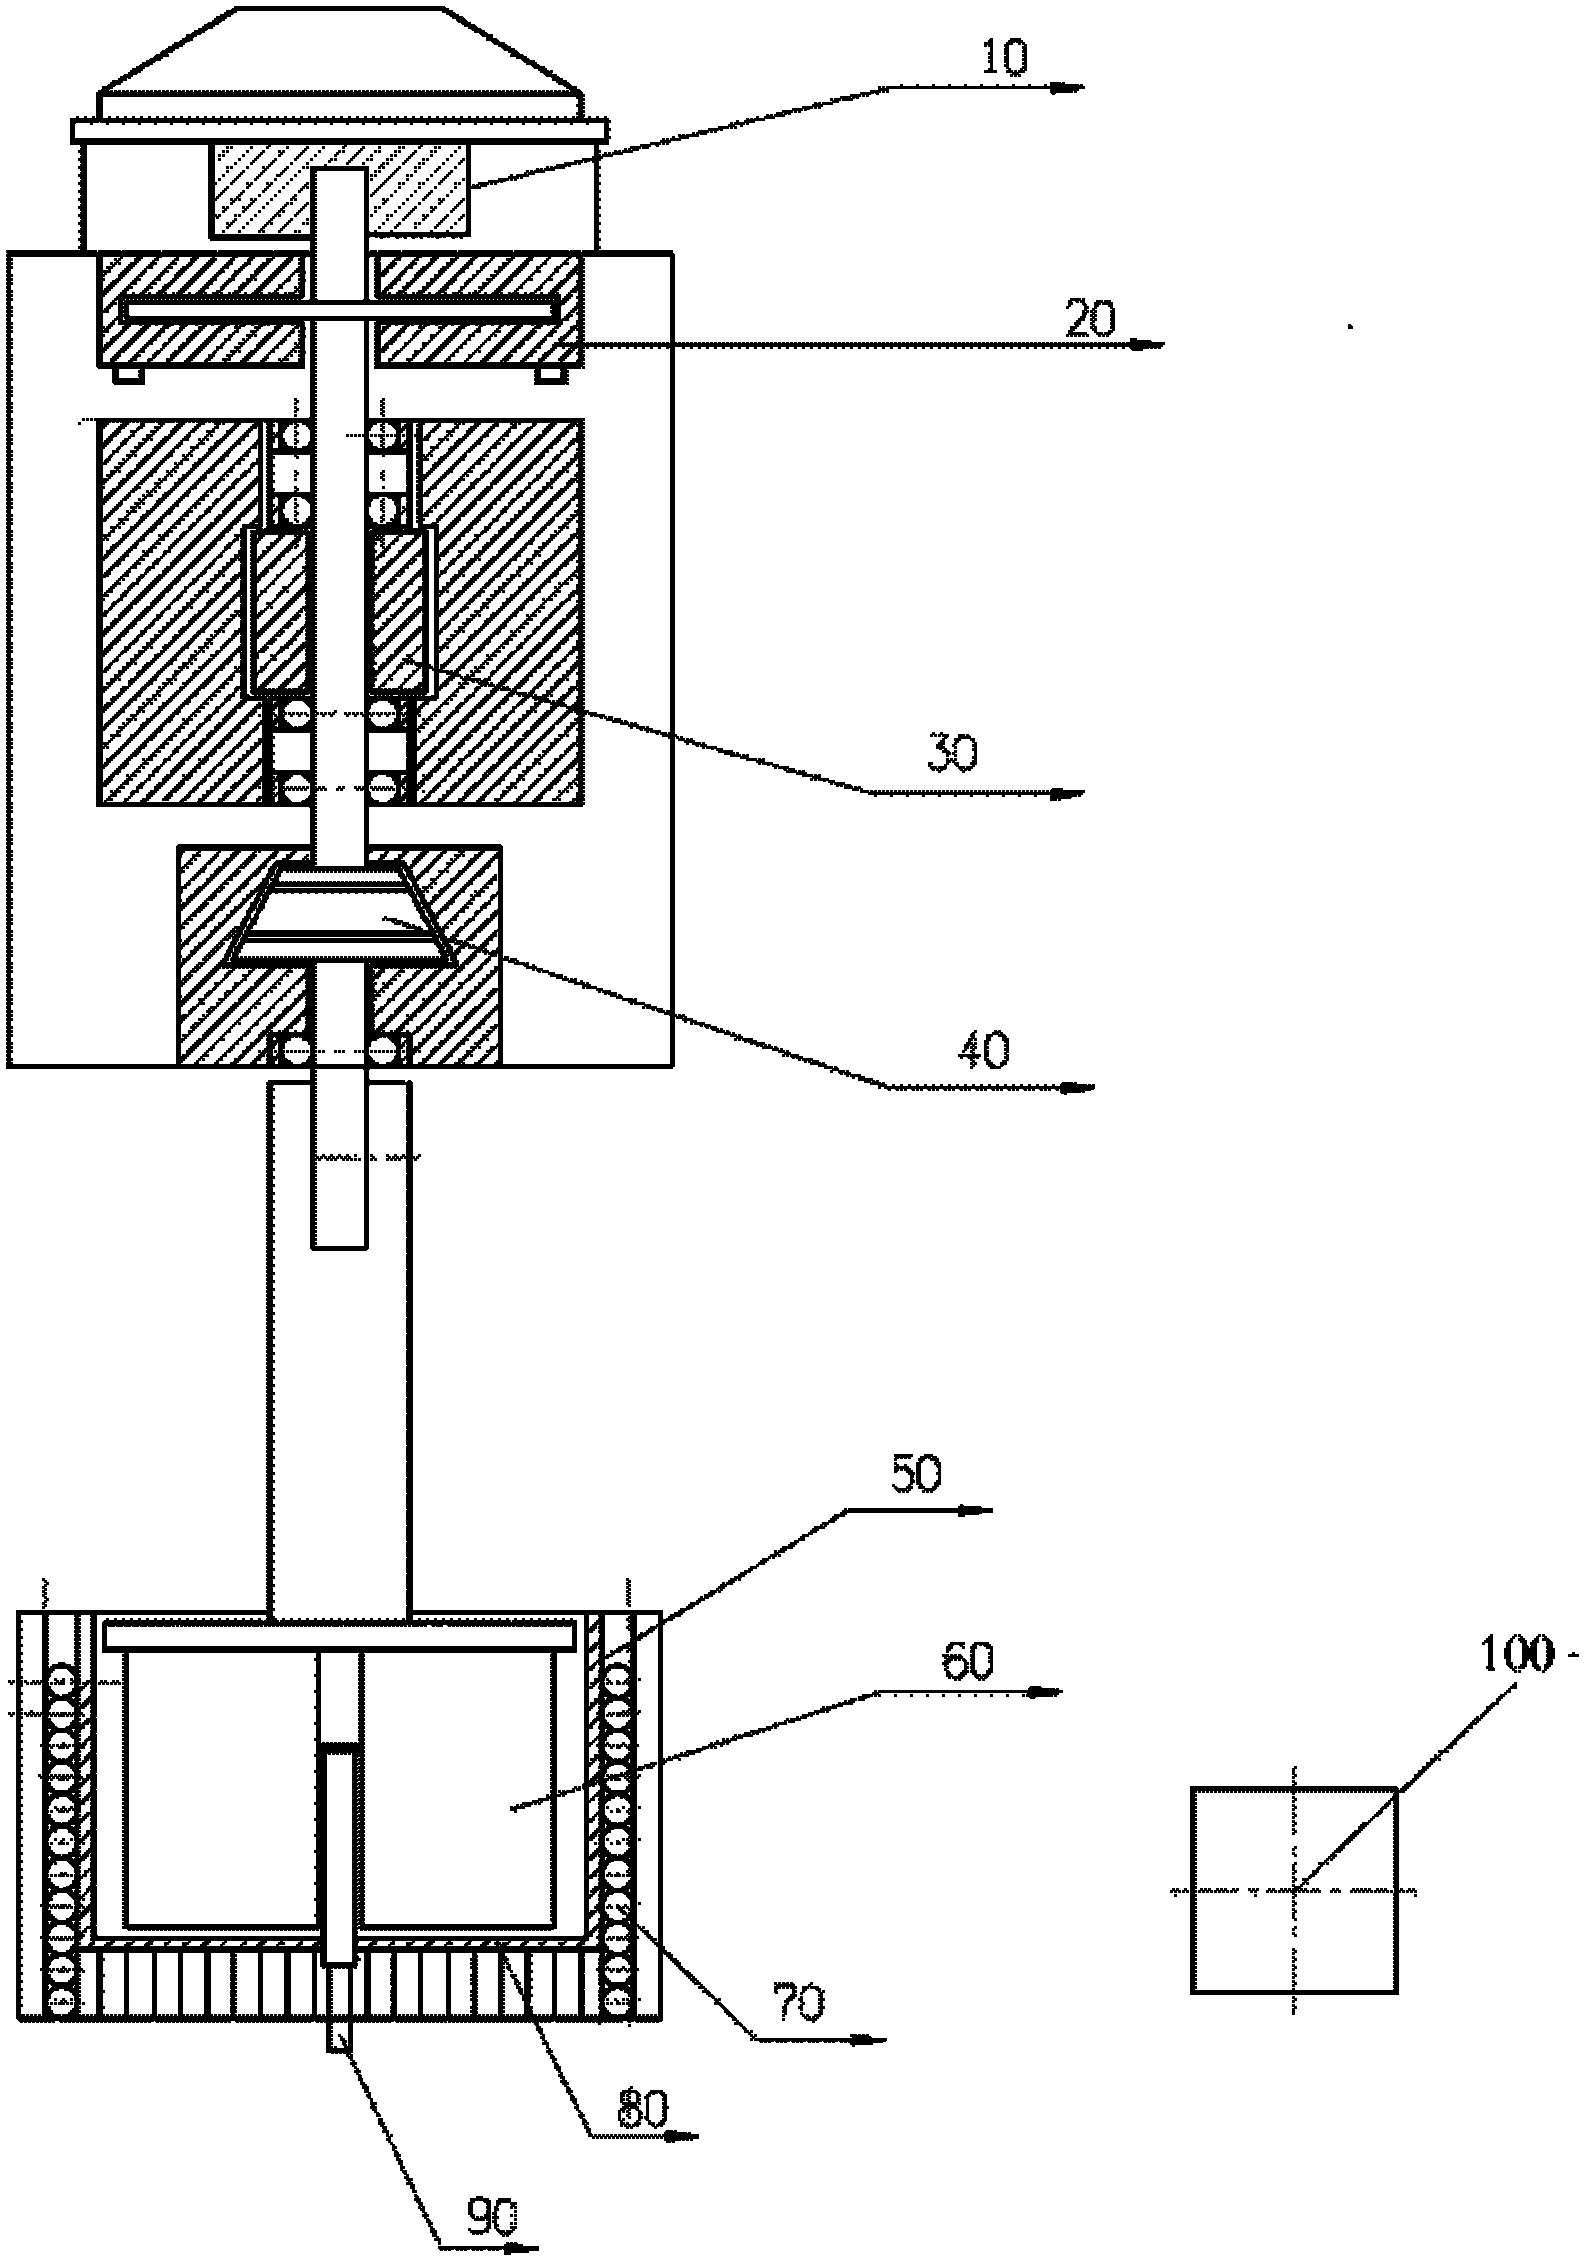 Pasting viscosity characteristic curve analysis device for cereal foods